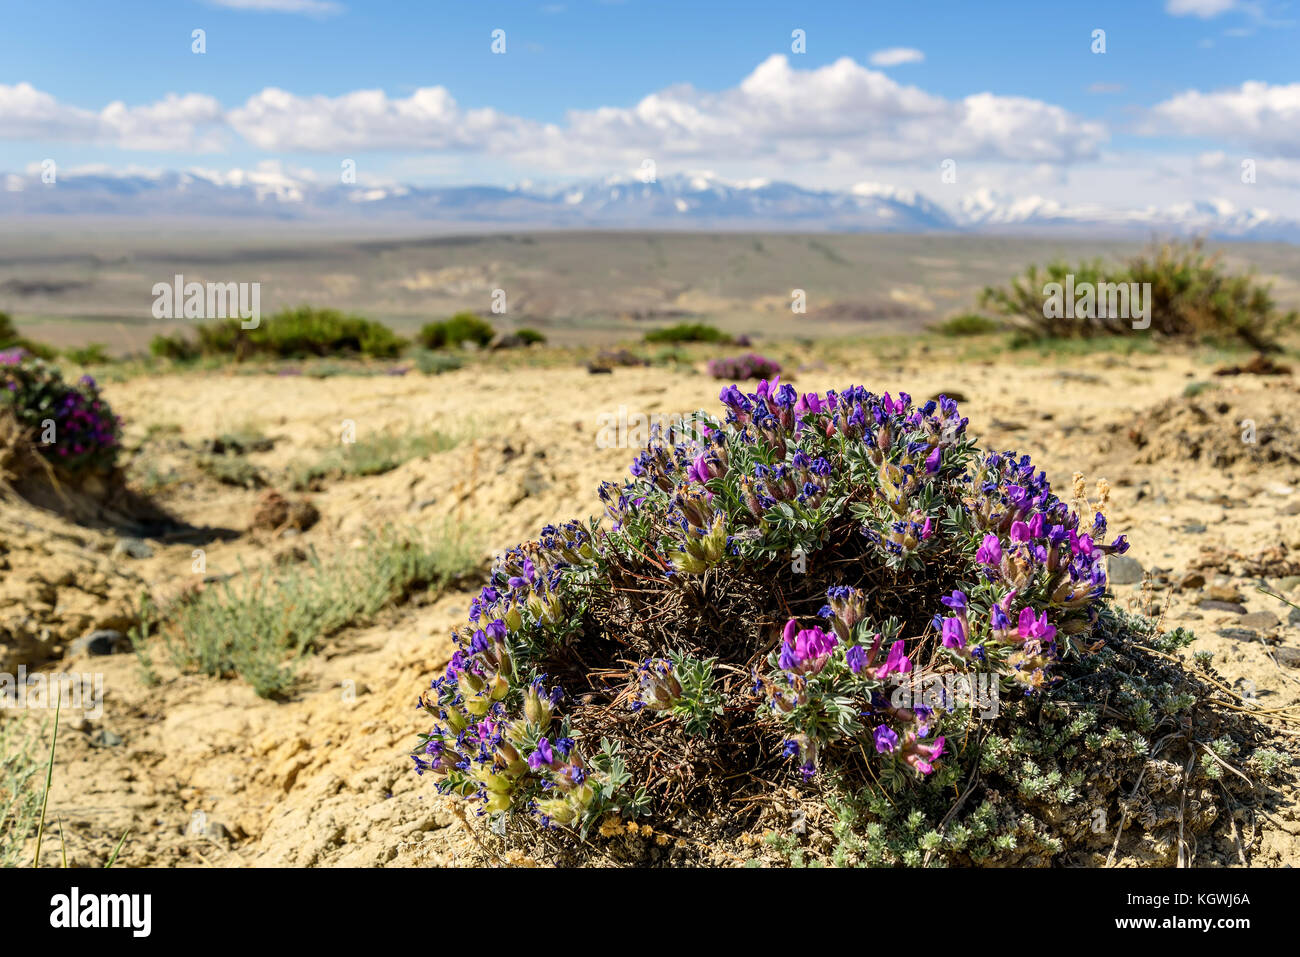 Scenic steppe desert landscape with a large bush of pink and blue flowers Dracocephalum on a background of mountains, blue sky and clouds on a sunny d Stock Photo